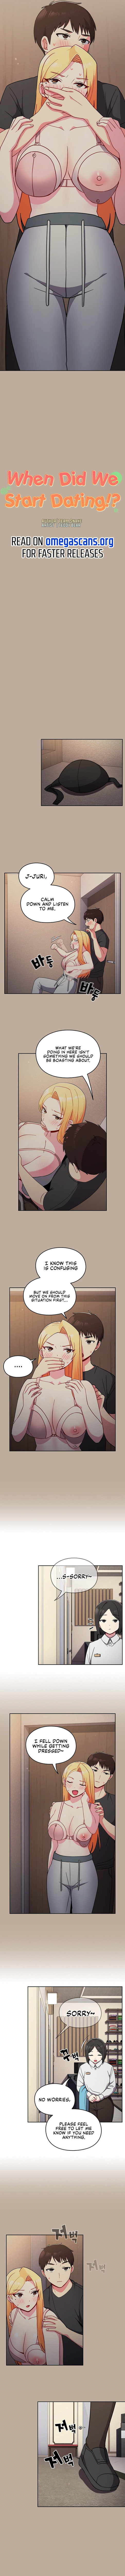 when-did-we-start-dating-chap-32-1